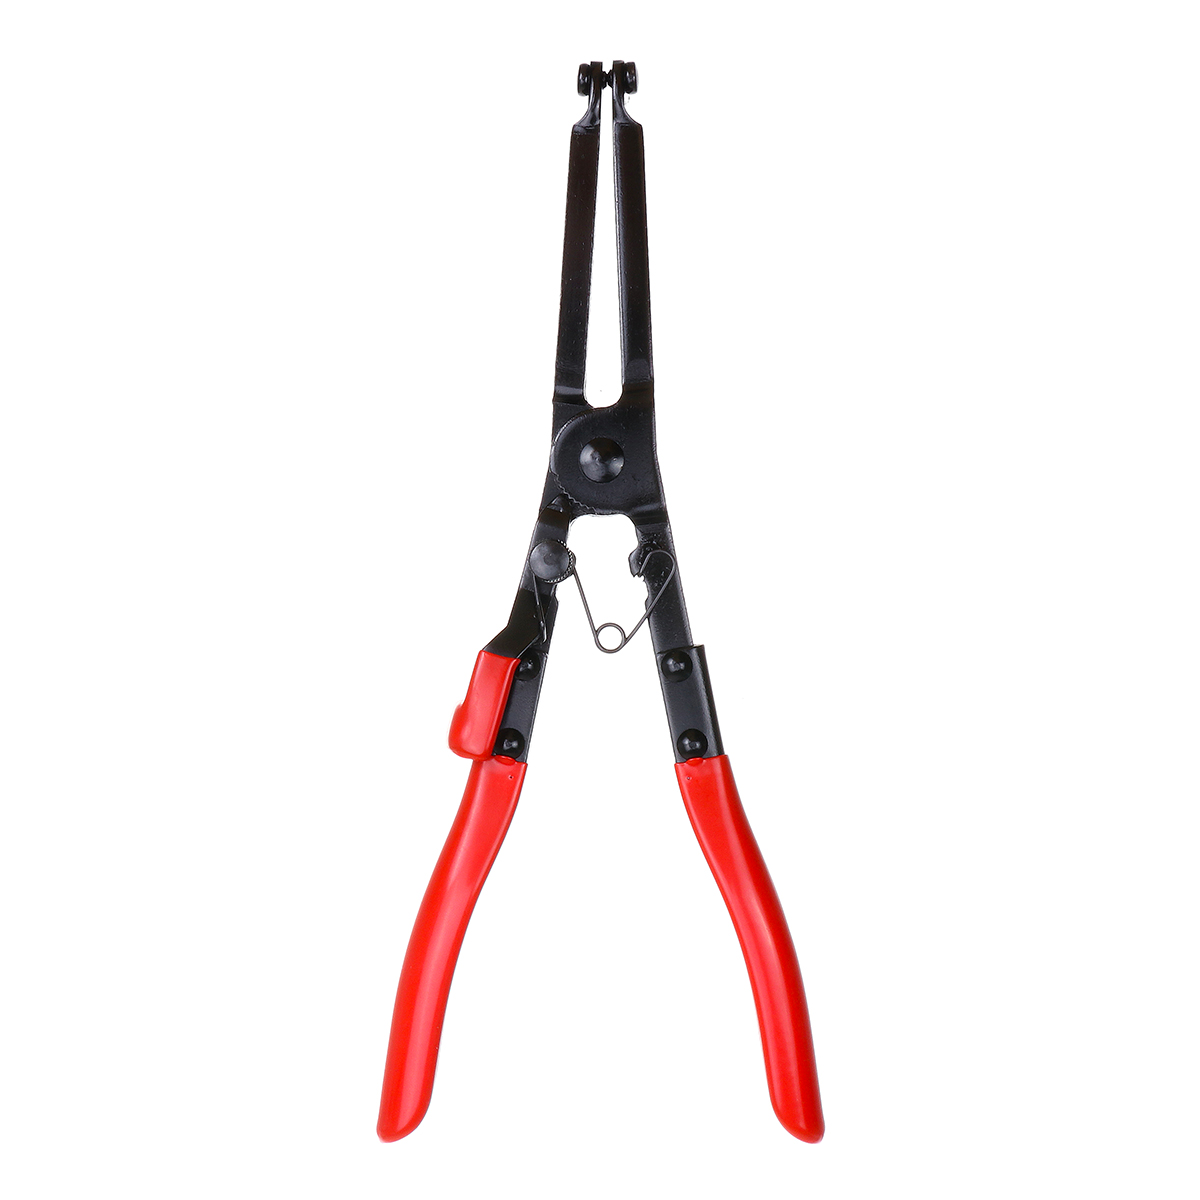 

Exhaust Muffler Pipe Clamp Pliers Hanger Remover Pliers Removal Stretcher Repair Tool Steel